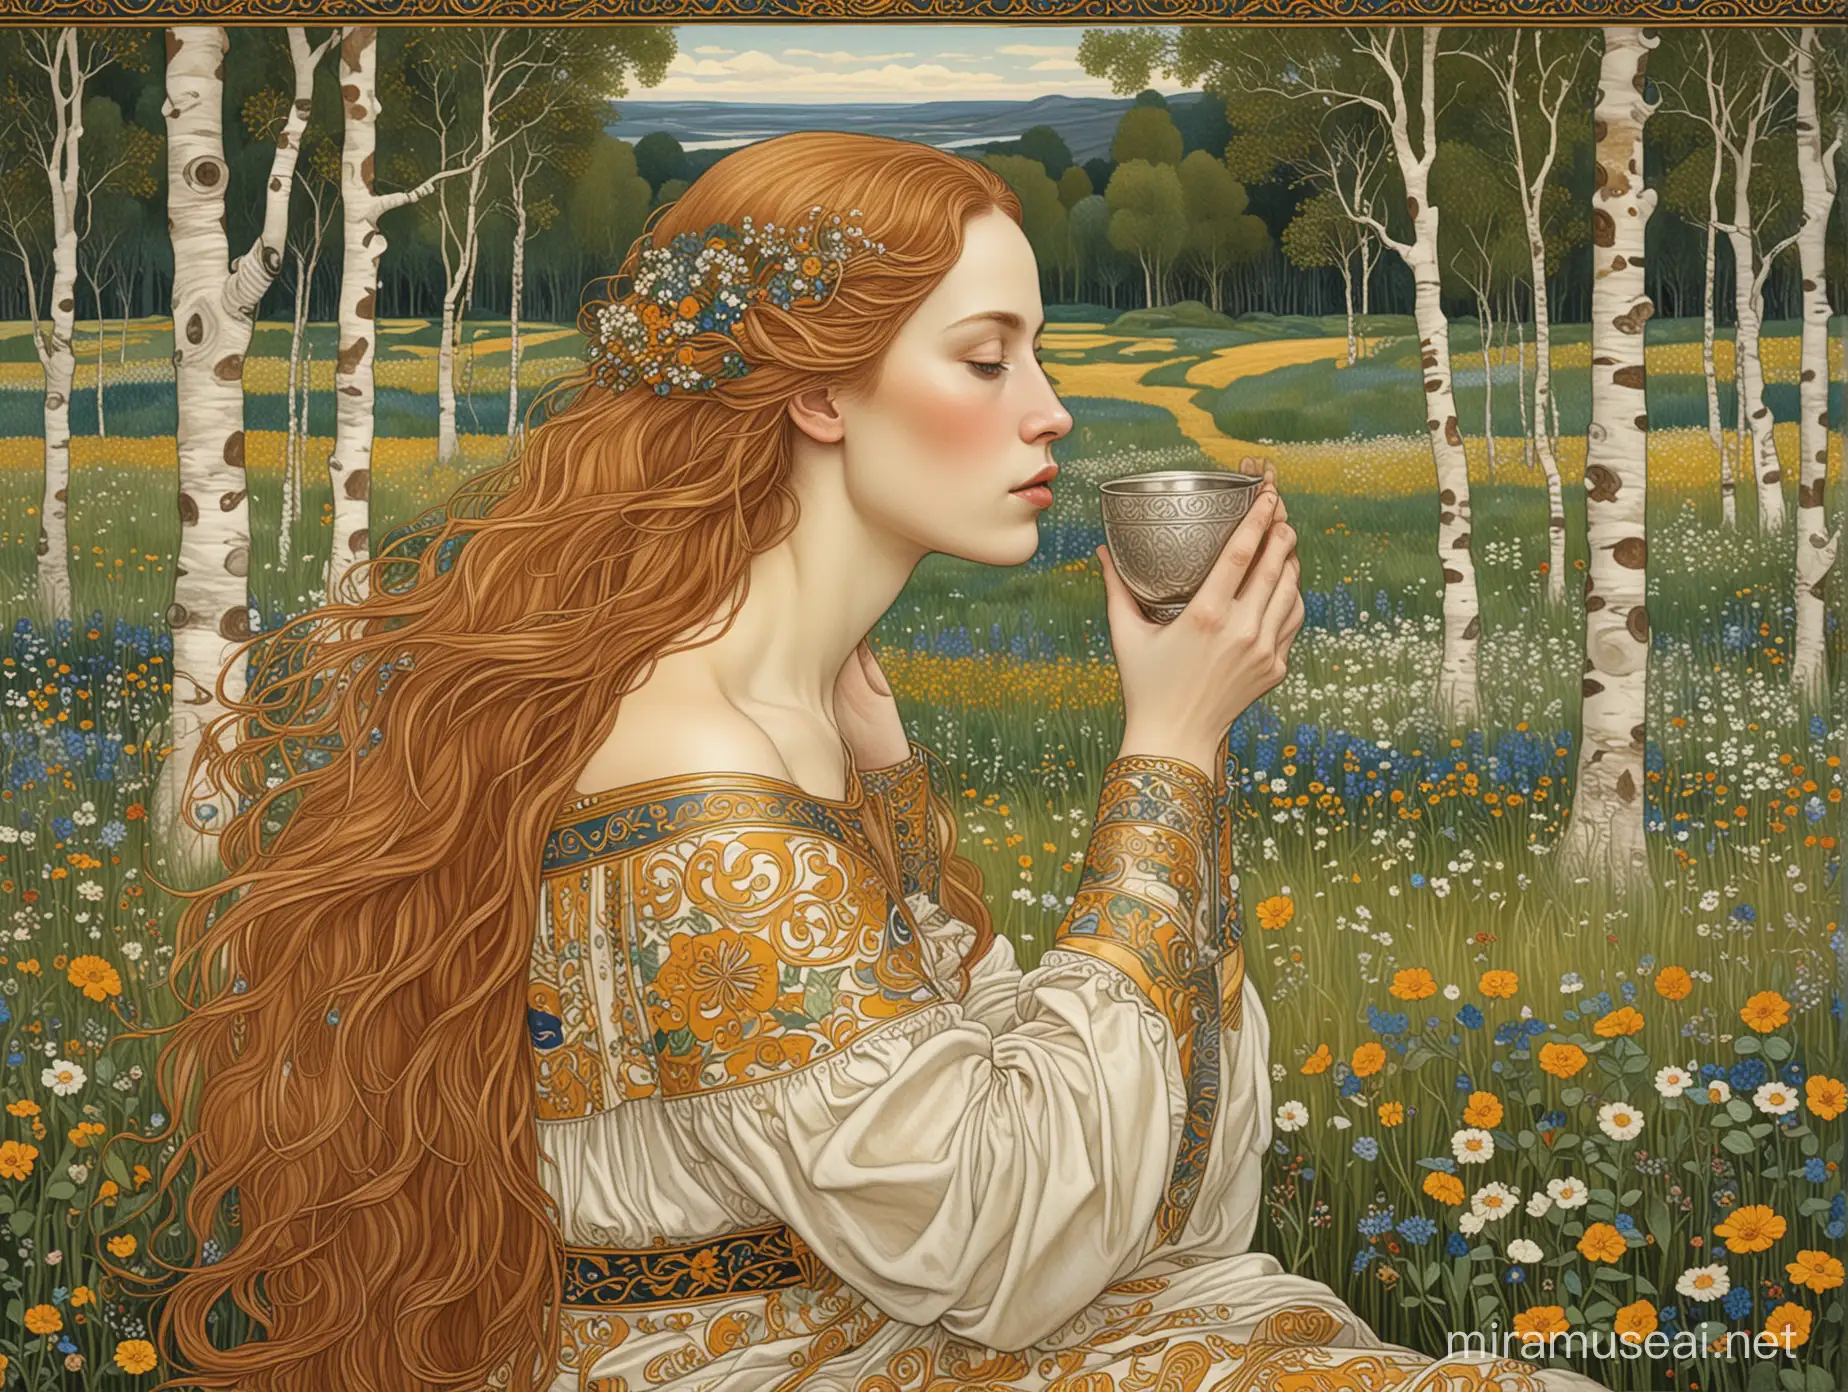 In the style of the painter Gustav Klimt. The graphic has borders with Celtic-style design. In the graphic, you can see a beautiful, medieval, long-haired woman sitting in a flowery meadow and drinking from a silver cup, one day, in the bright morning. In the background there is a birch grove and a distant sea.